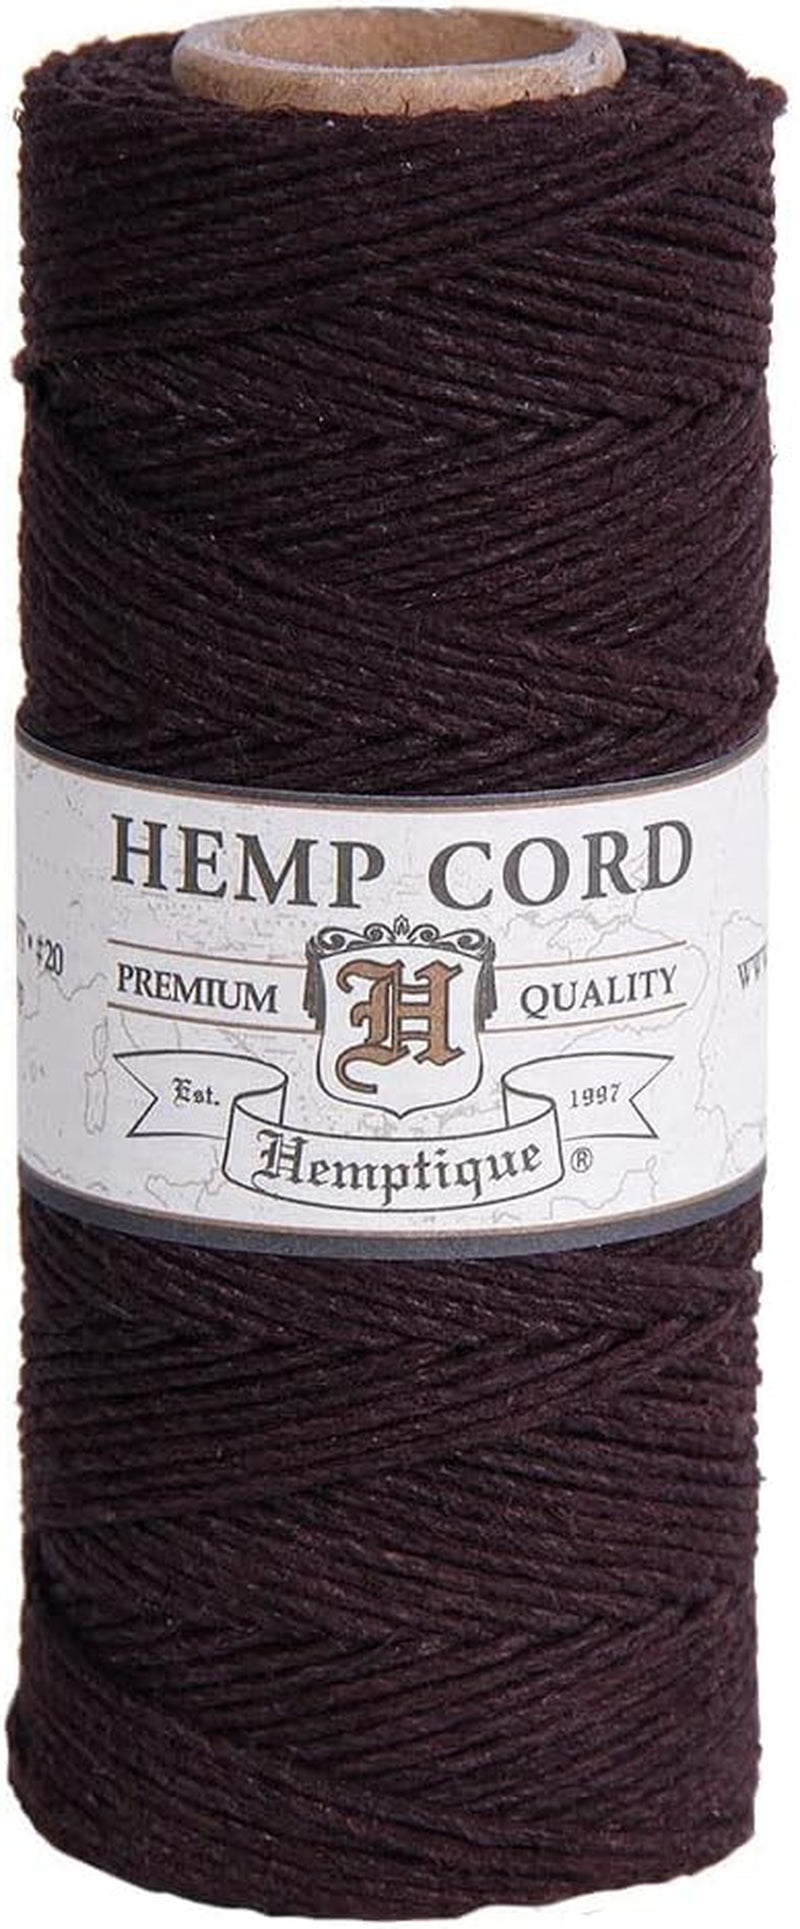 100% Hemp Cord Spool - 62.5 Meter Hemp String - Made with Love - No. 20 ~ 1Mm Cord Thread for Jewelry Making, Macrame, Scrapbooking, DIY, & More - White